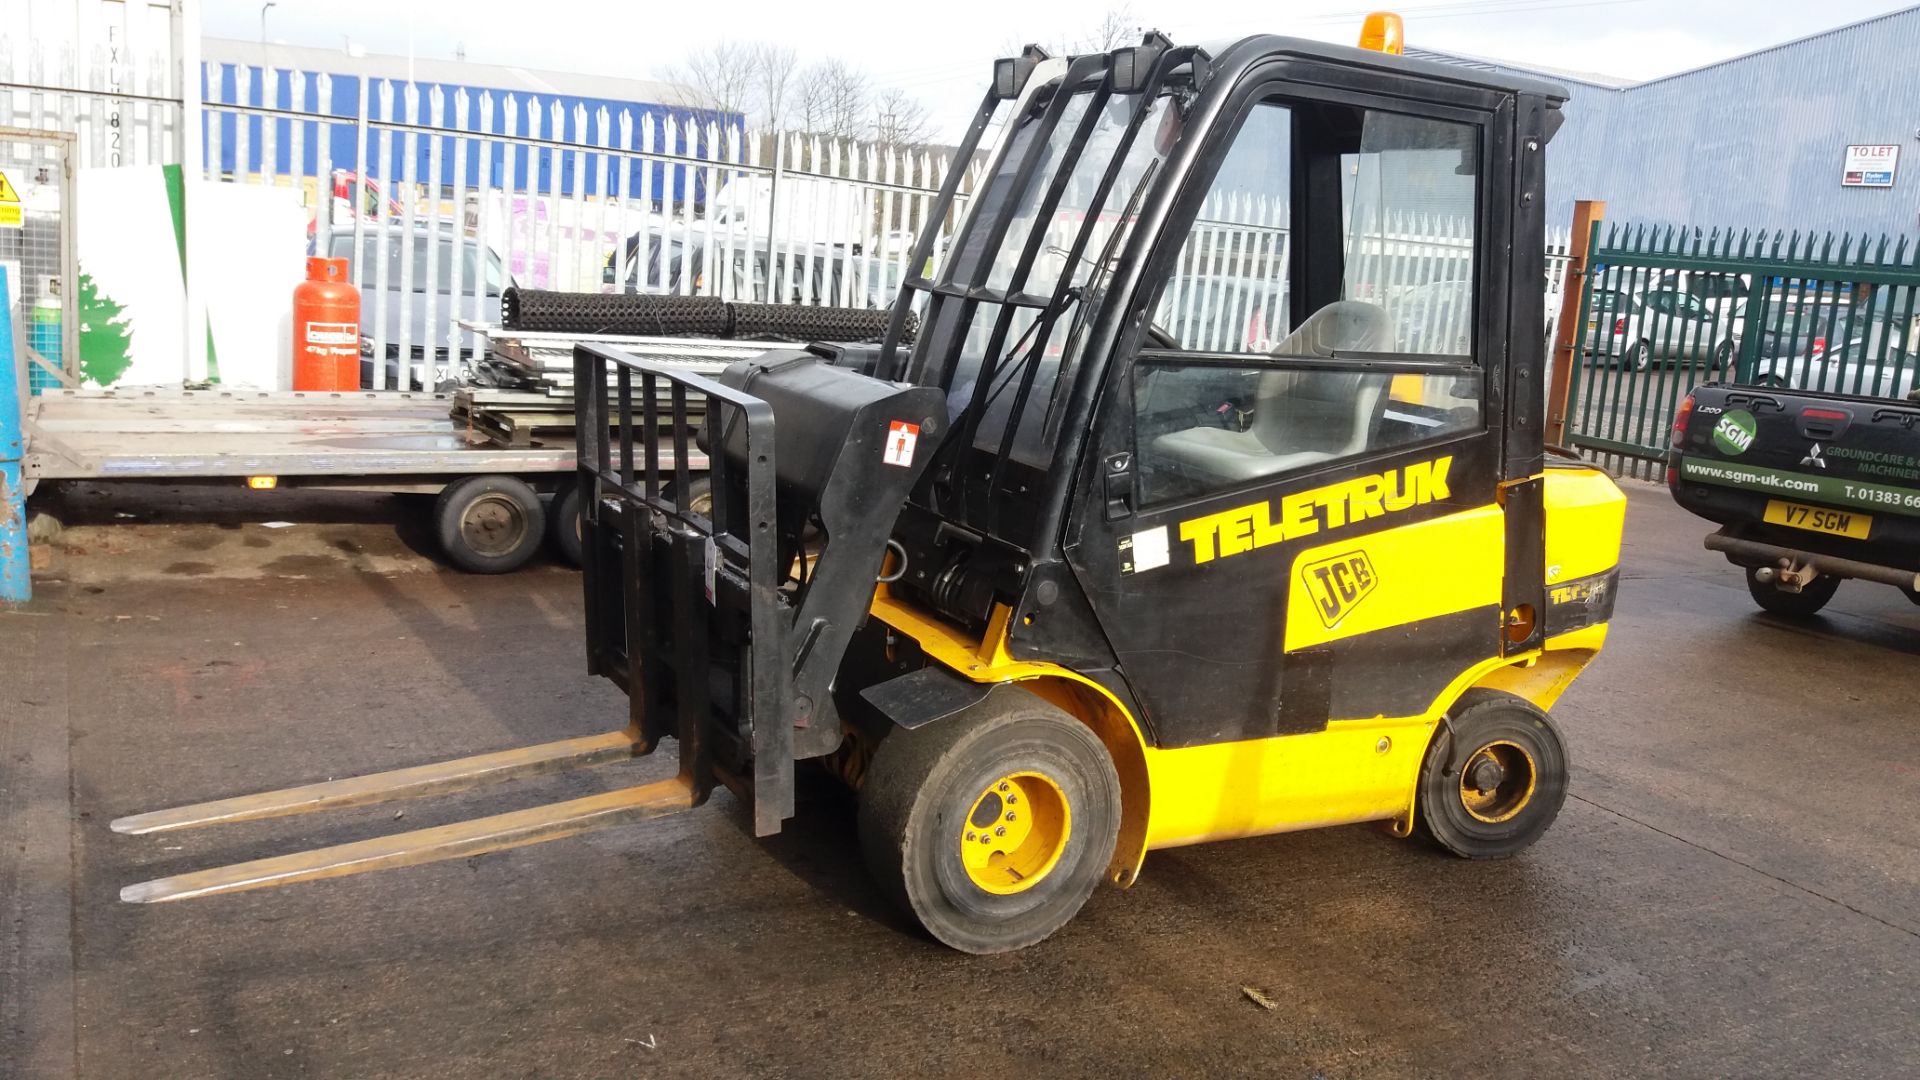 JCB TLT30 Teletruk counterbalance forklift with telescopic boom - Image 9 of 22